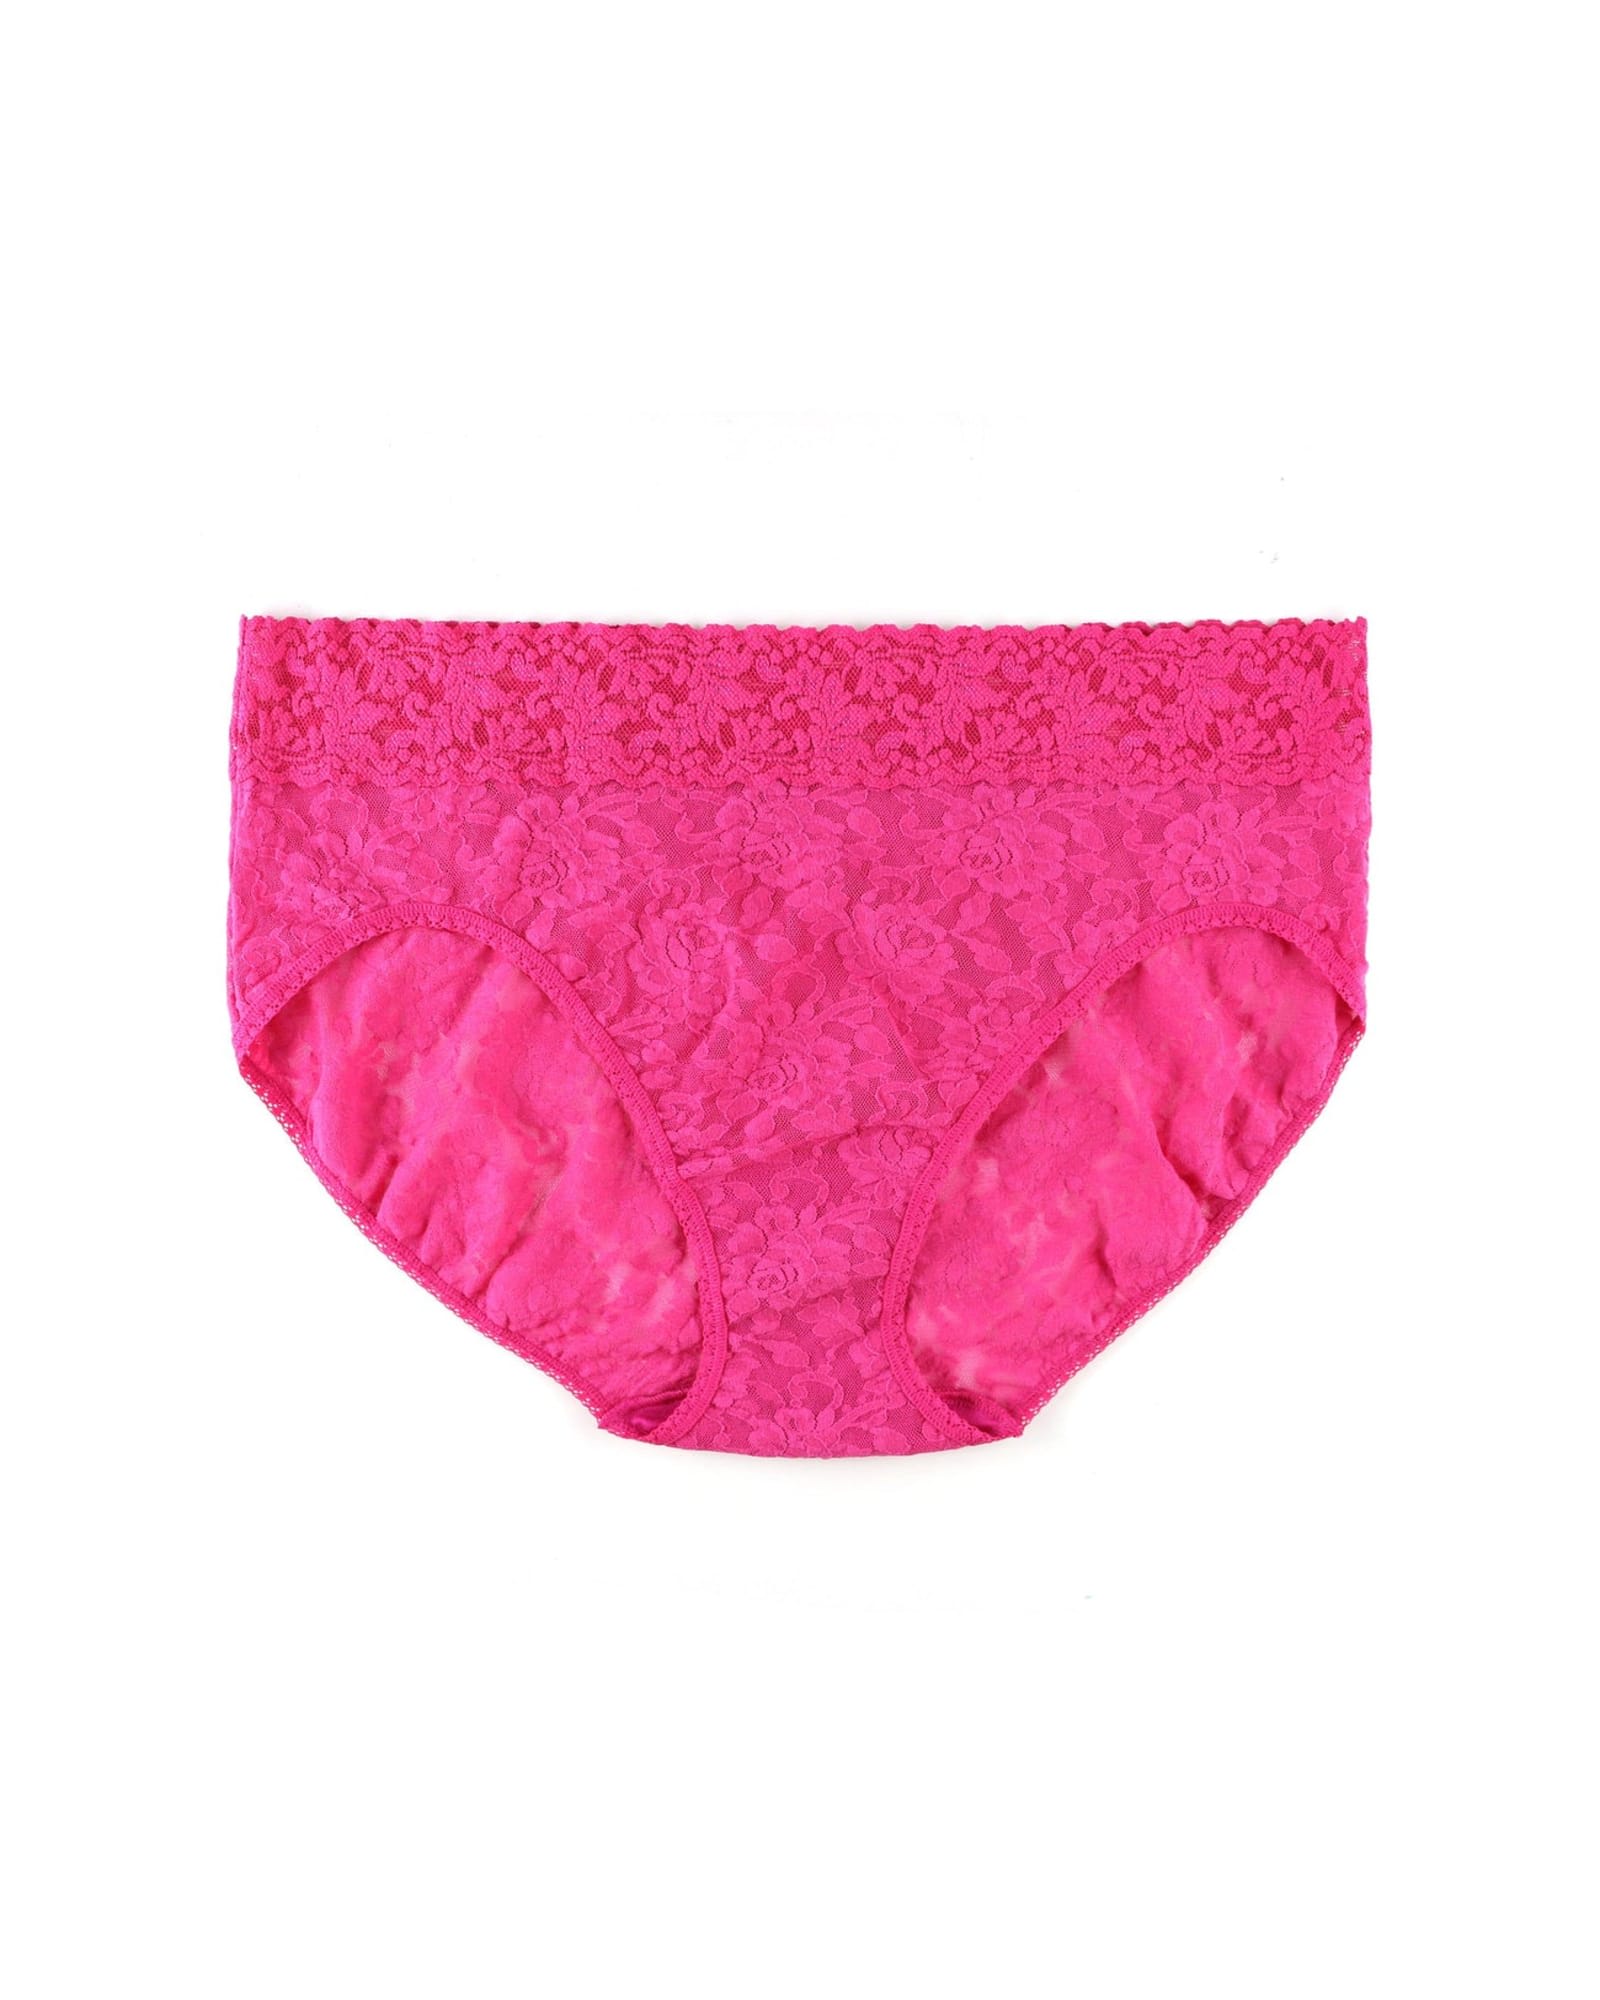 Womens underwear Signature Lace sexy Panty